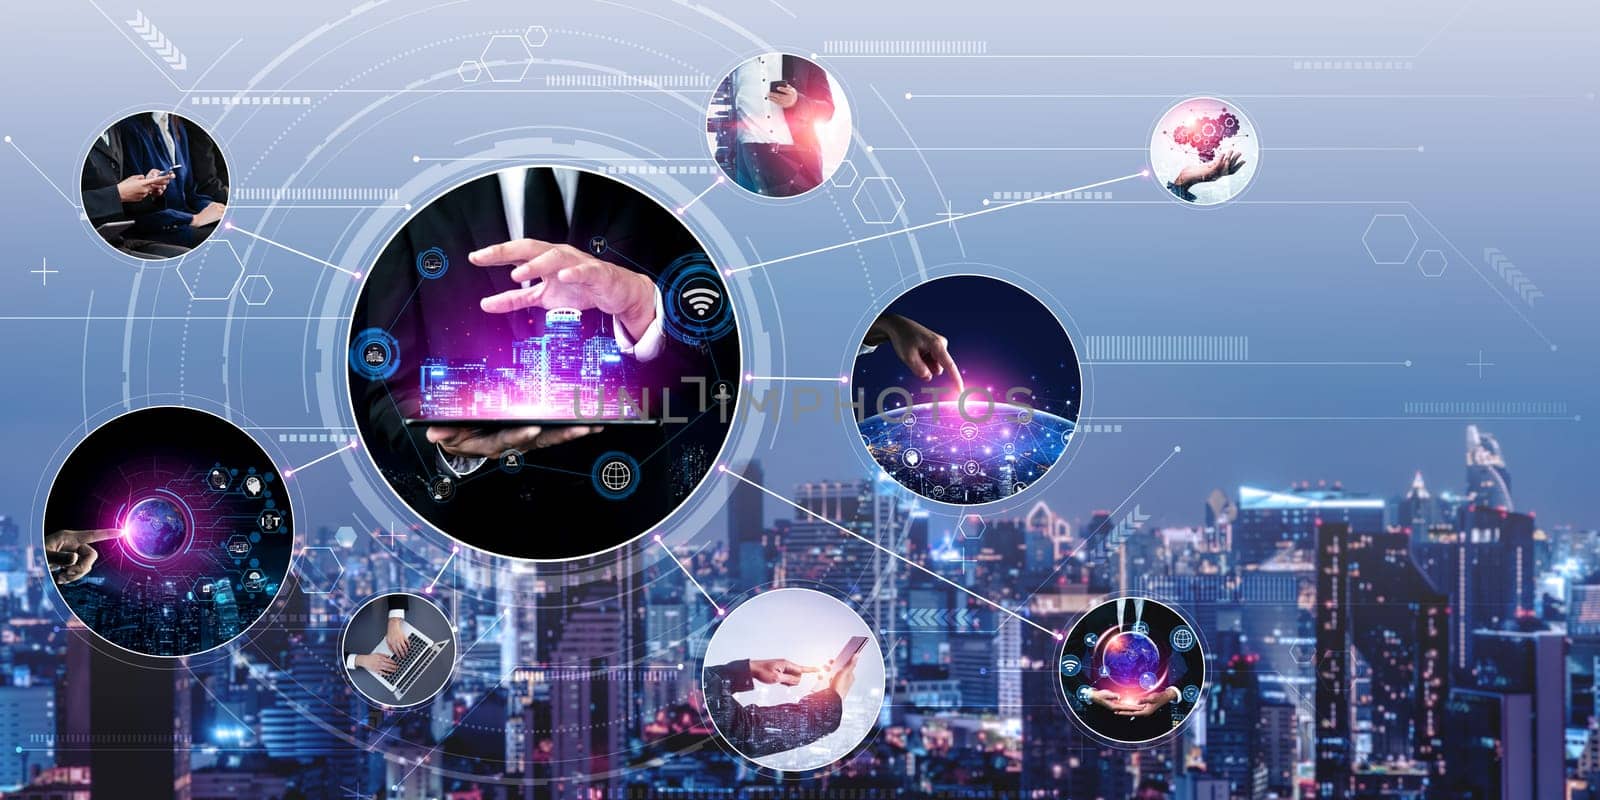 Communication technology , smart connection IOT and people network technology concept. People using connective device to connect to the secured internet network and cloud computing server vexel